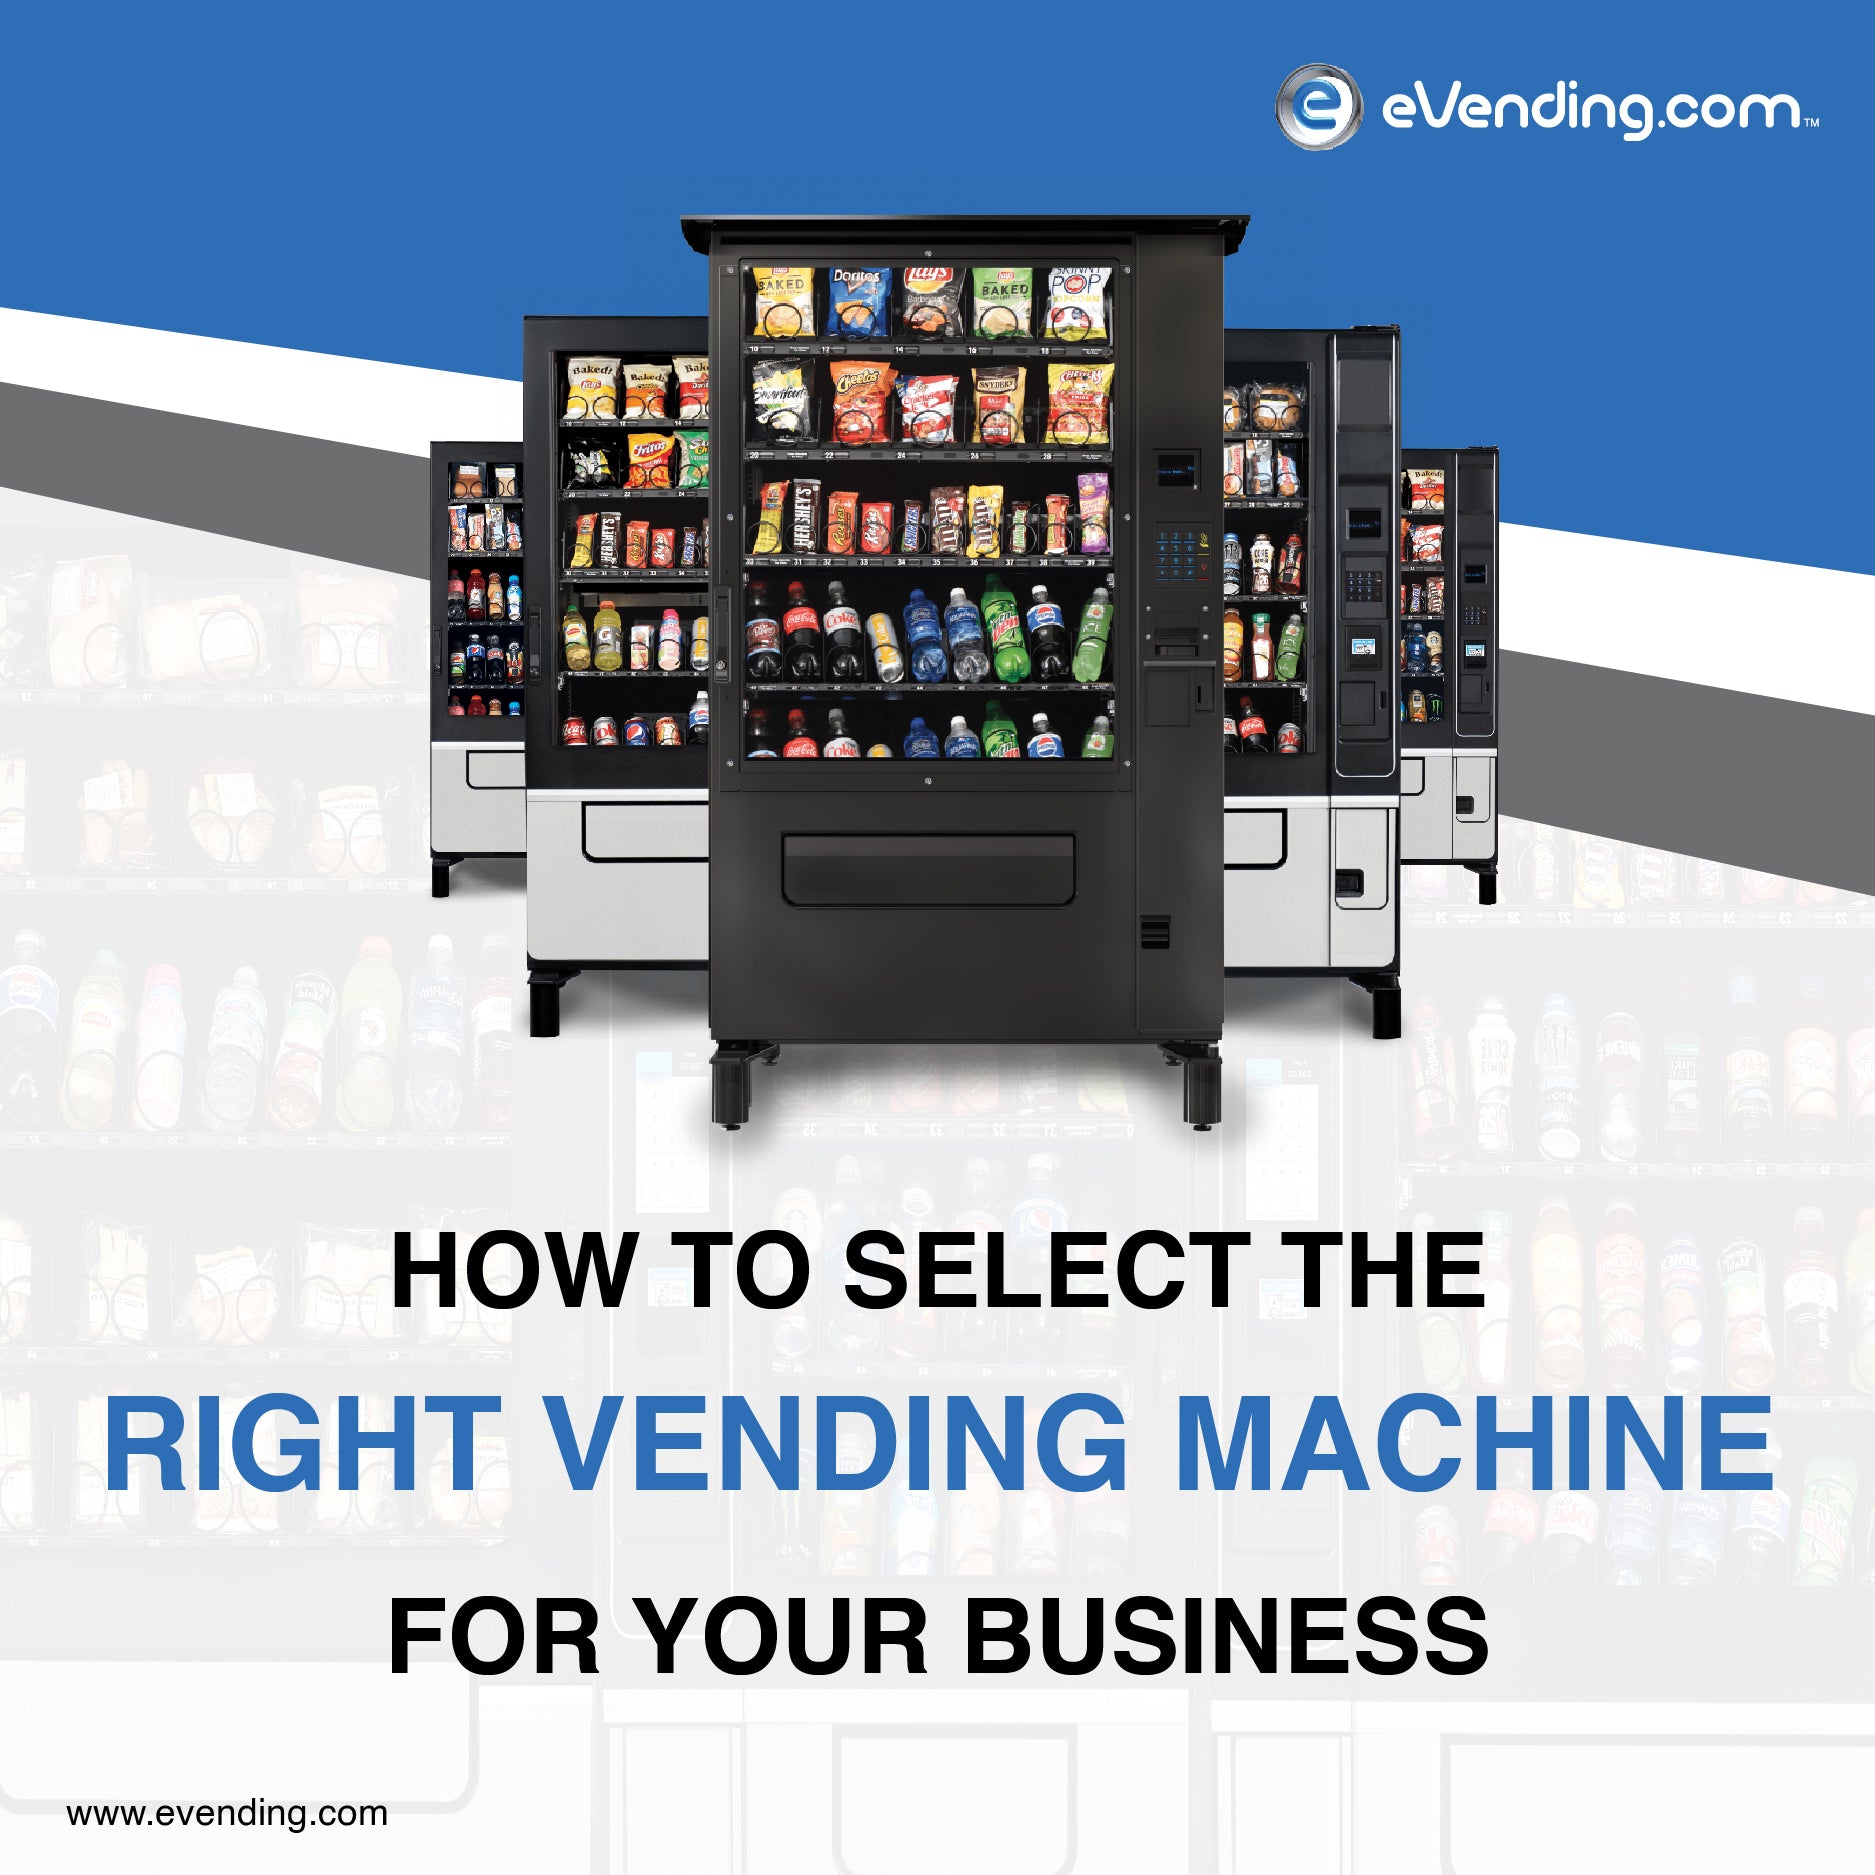 Maximize Profits and Customer Satisfaction Expert Tips for Selecting the Right Vending Machine for Your Business